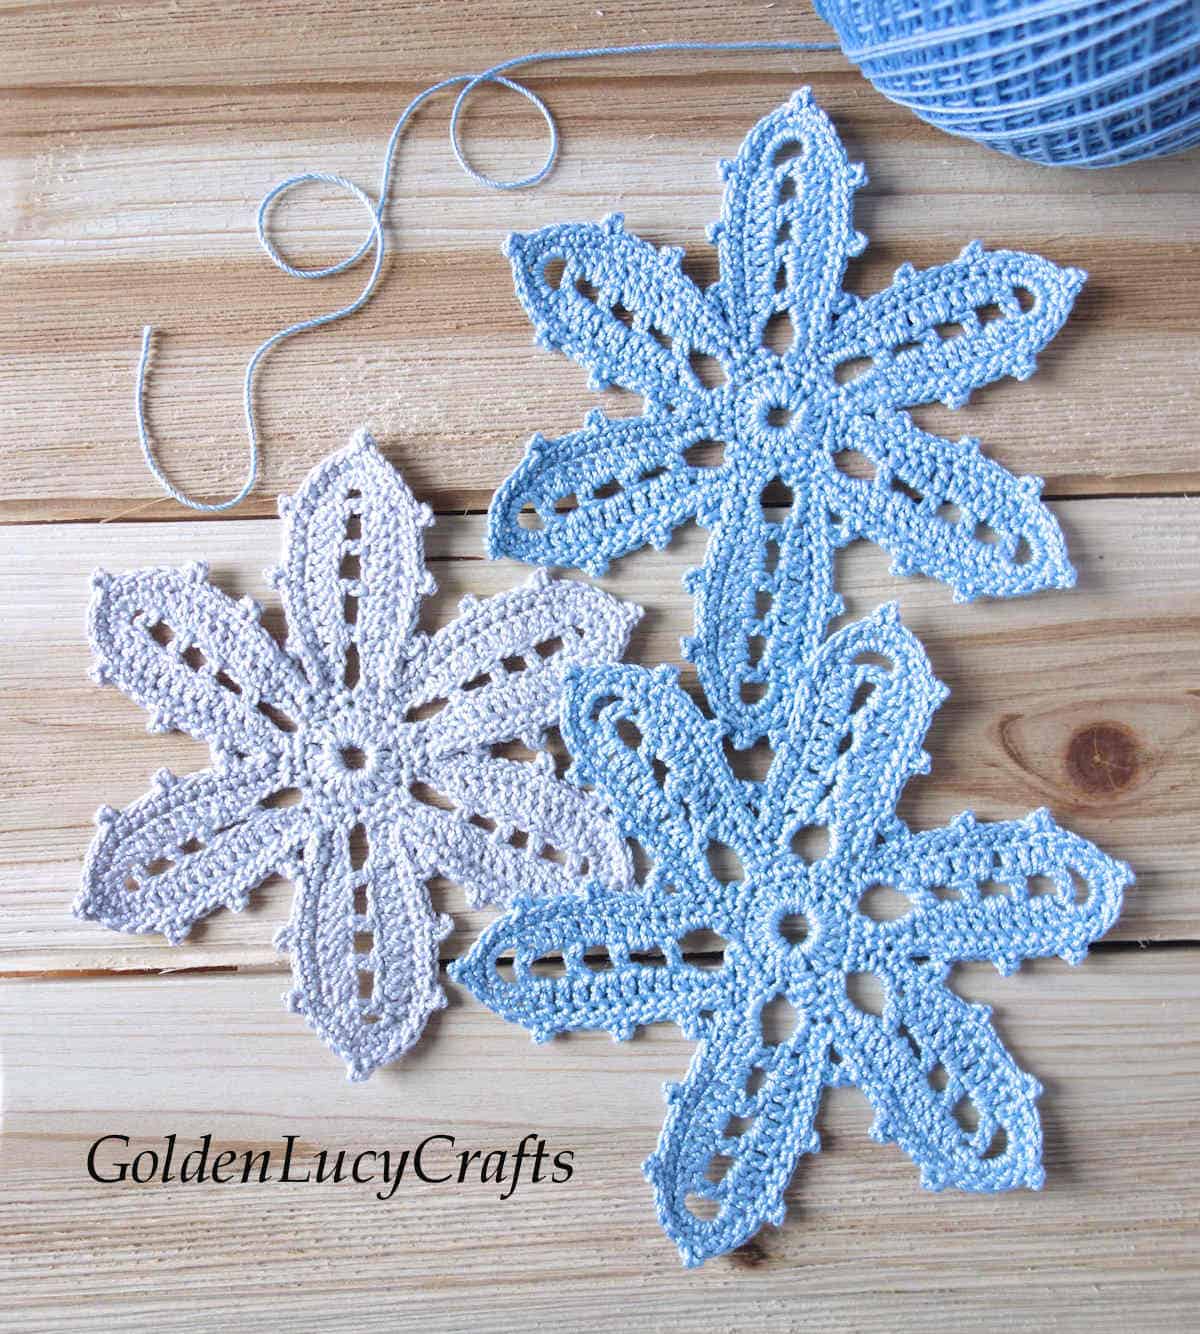 Three crocheted lacy flowers.